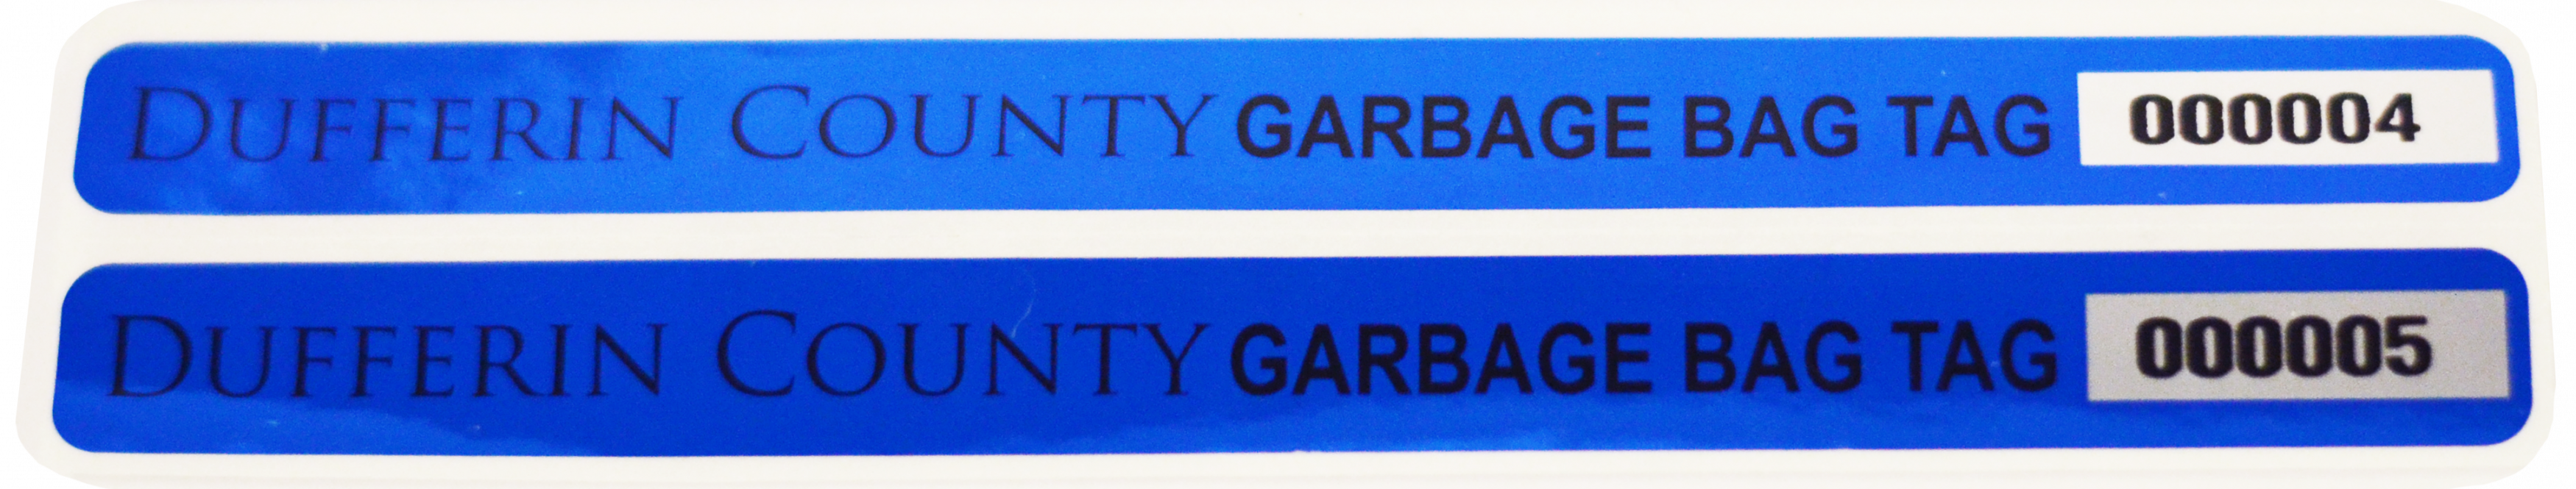 long thin blue stickers on a sheet of paper that say Dufferin County Garbage Bag Tag